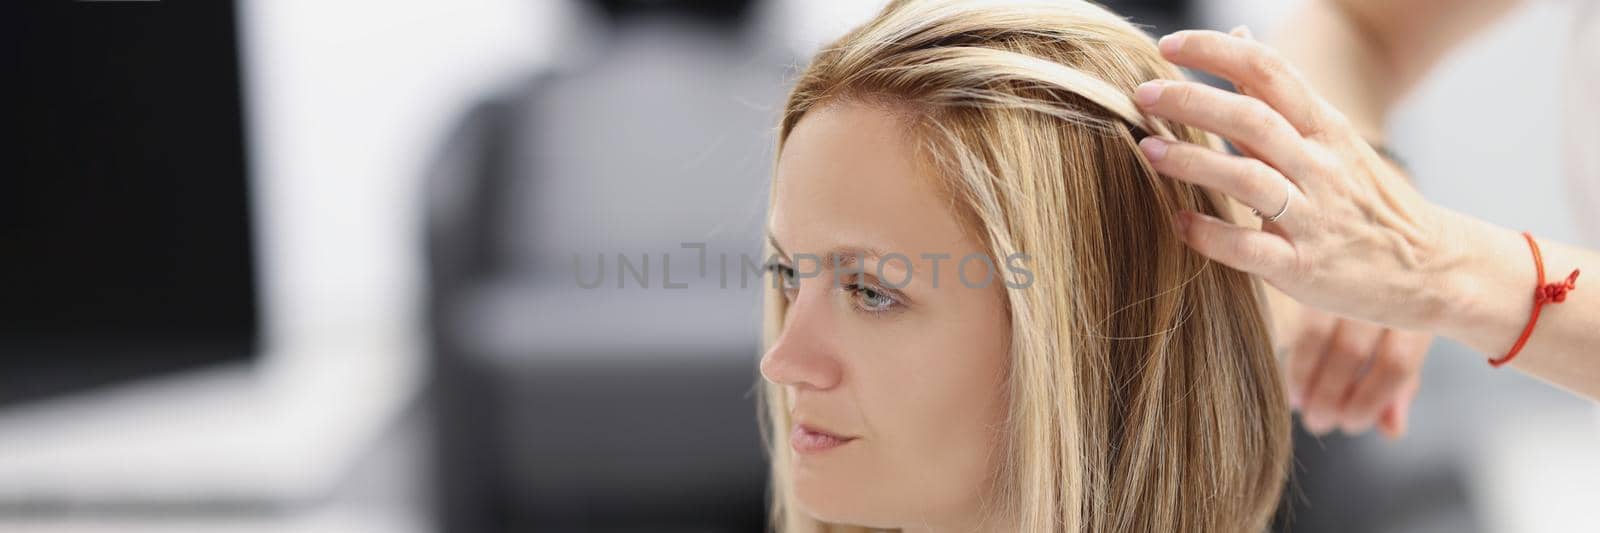 Portrait of female client on appointment at hairdresser, professional master creating haircut, touching hair. Beauty salon, hair treatment, wellness, new image, change life concept. Blurred background